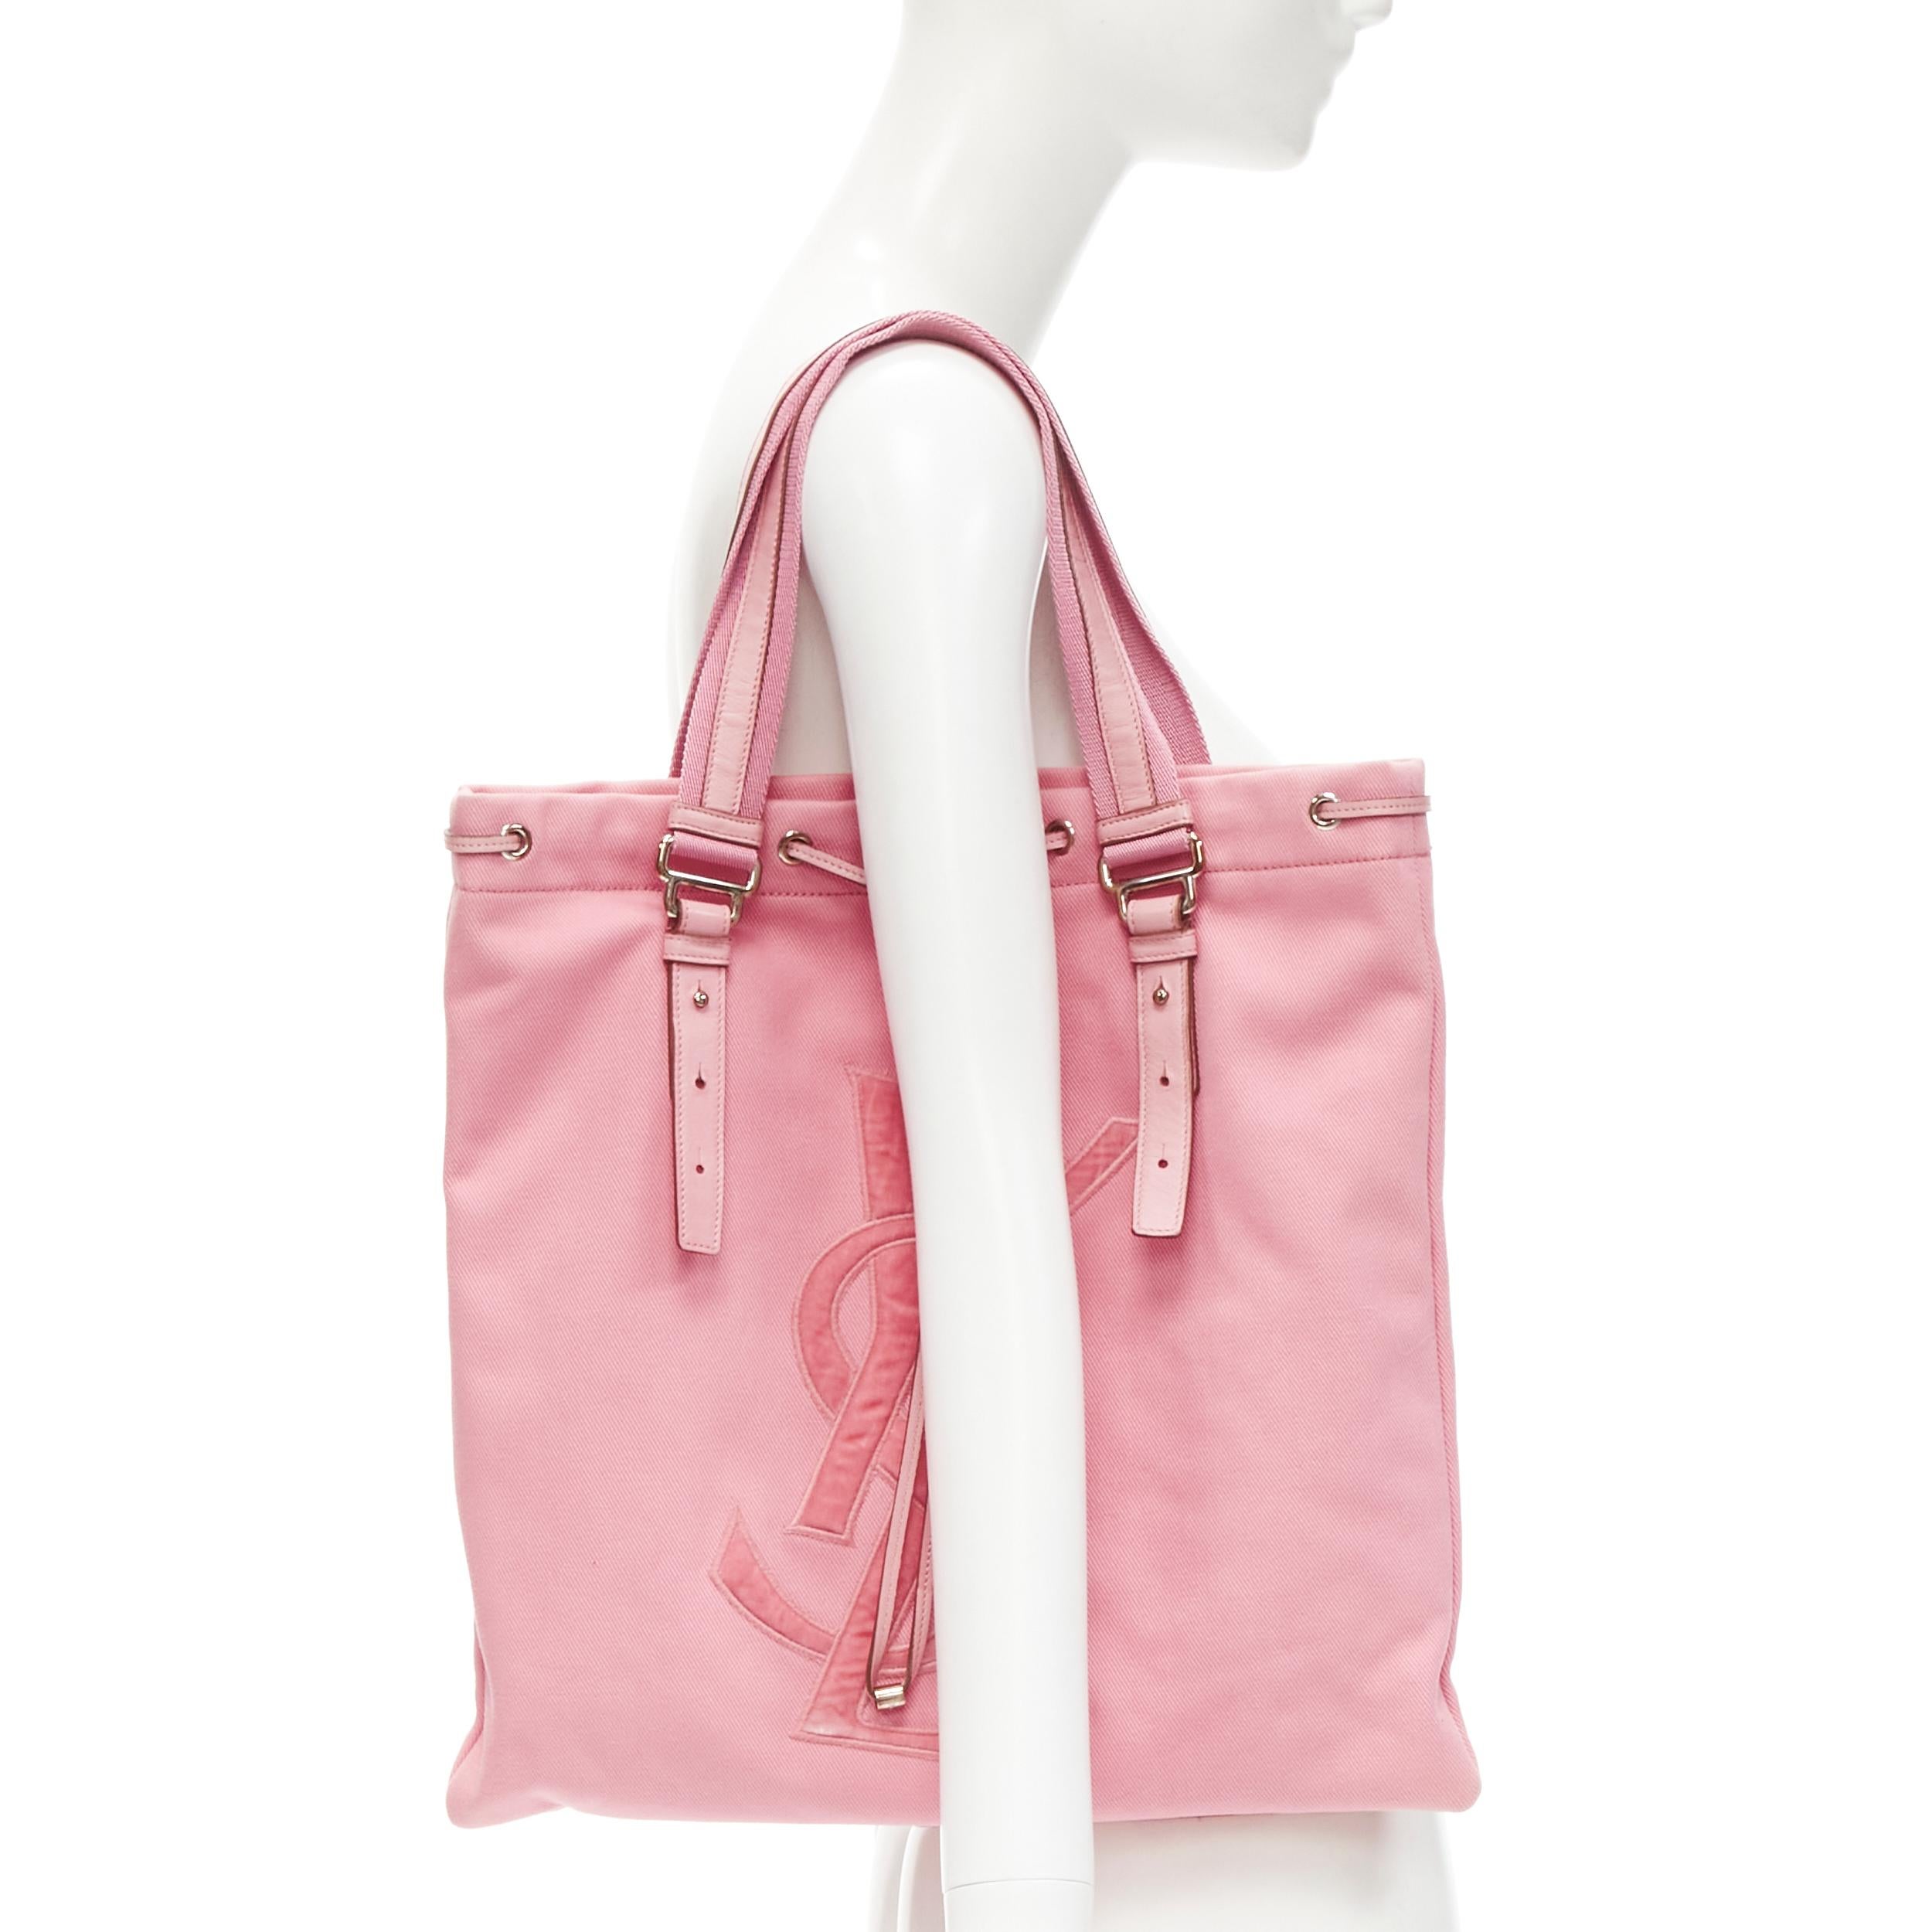 YVES SAINT LAURENT YSL pink canvas velvet logo applique drawstring tote bag
Brand: Yves Saint Laurent
Model: 121631 002122
Material: Canvas
Color: Pink
Pattern: Solid
Closure: Drawstring
Extra Detail: Leather drawstring at opening. Silver-tone